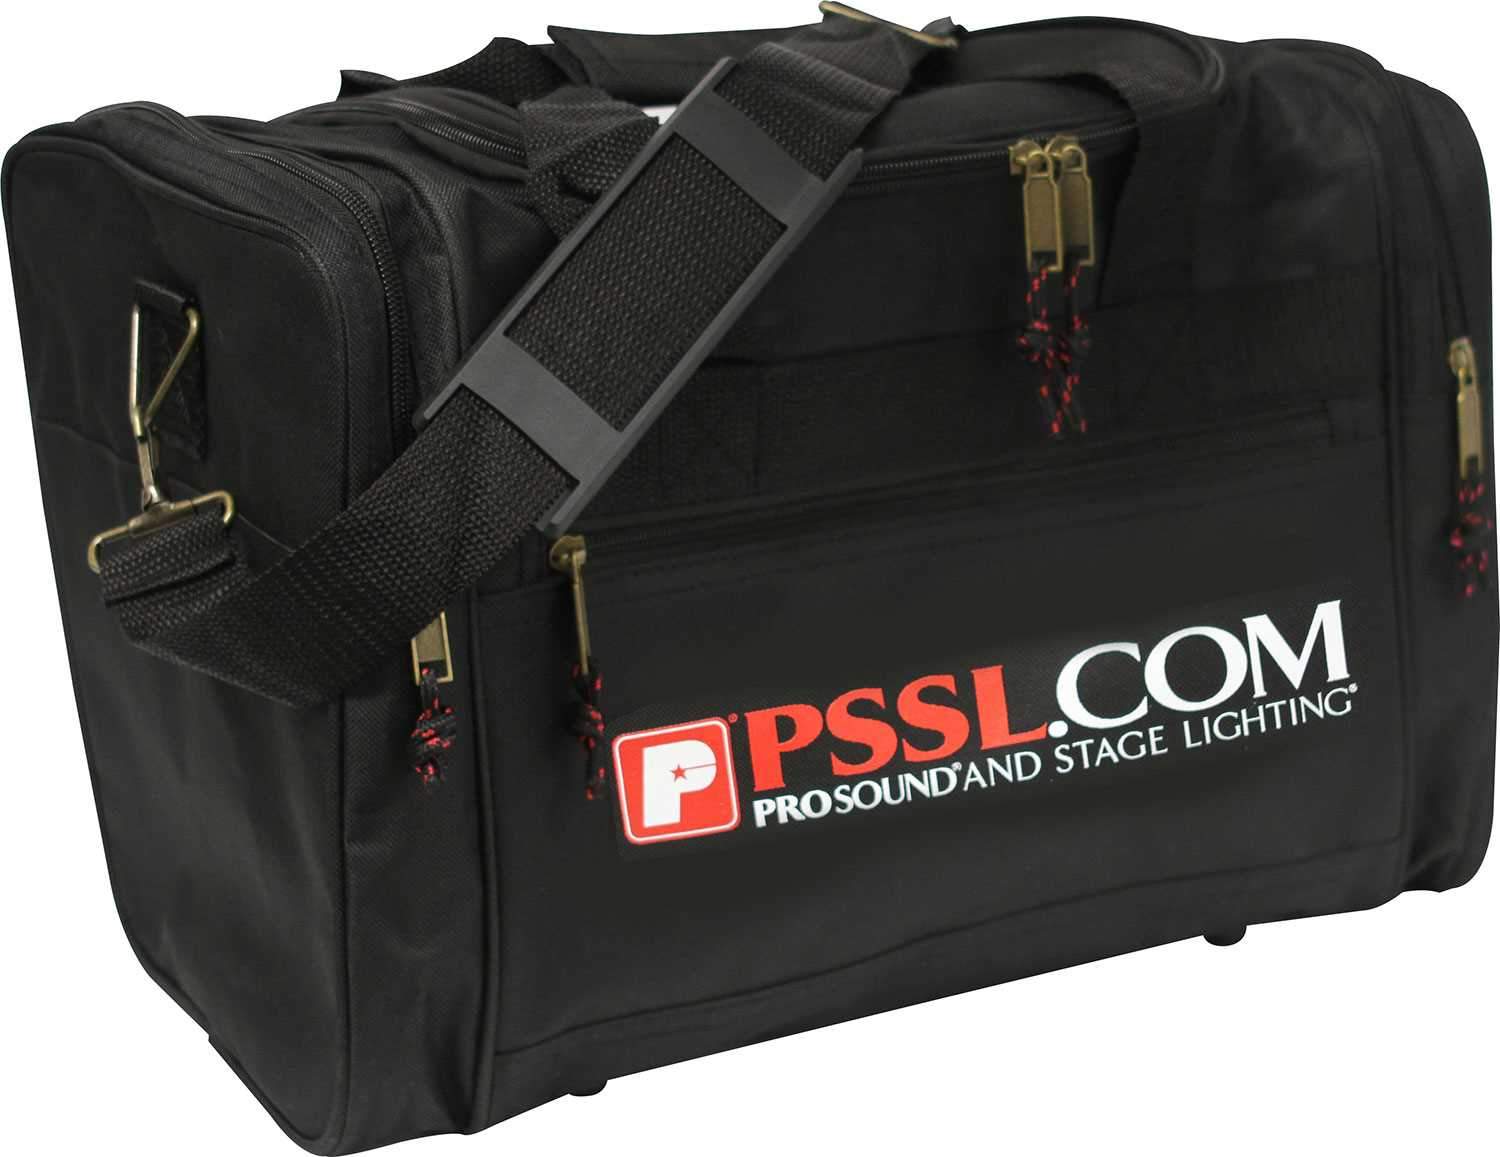 PSSL Utility Gear & Equipment Bag - PSSL ProSound and Stage Lighting